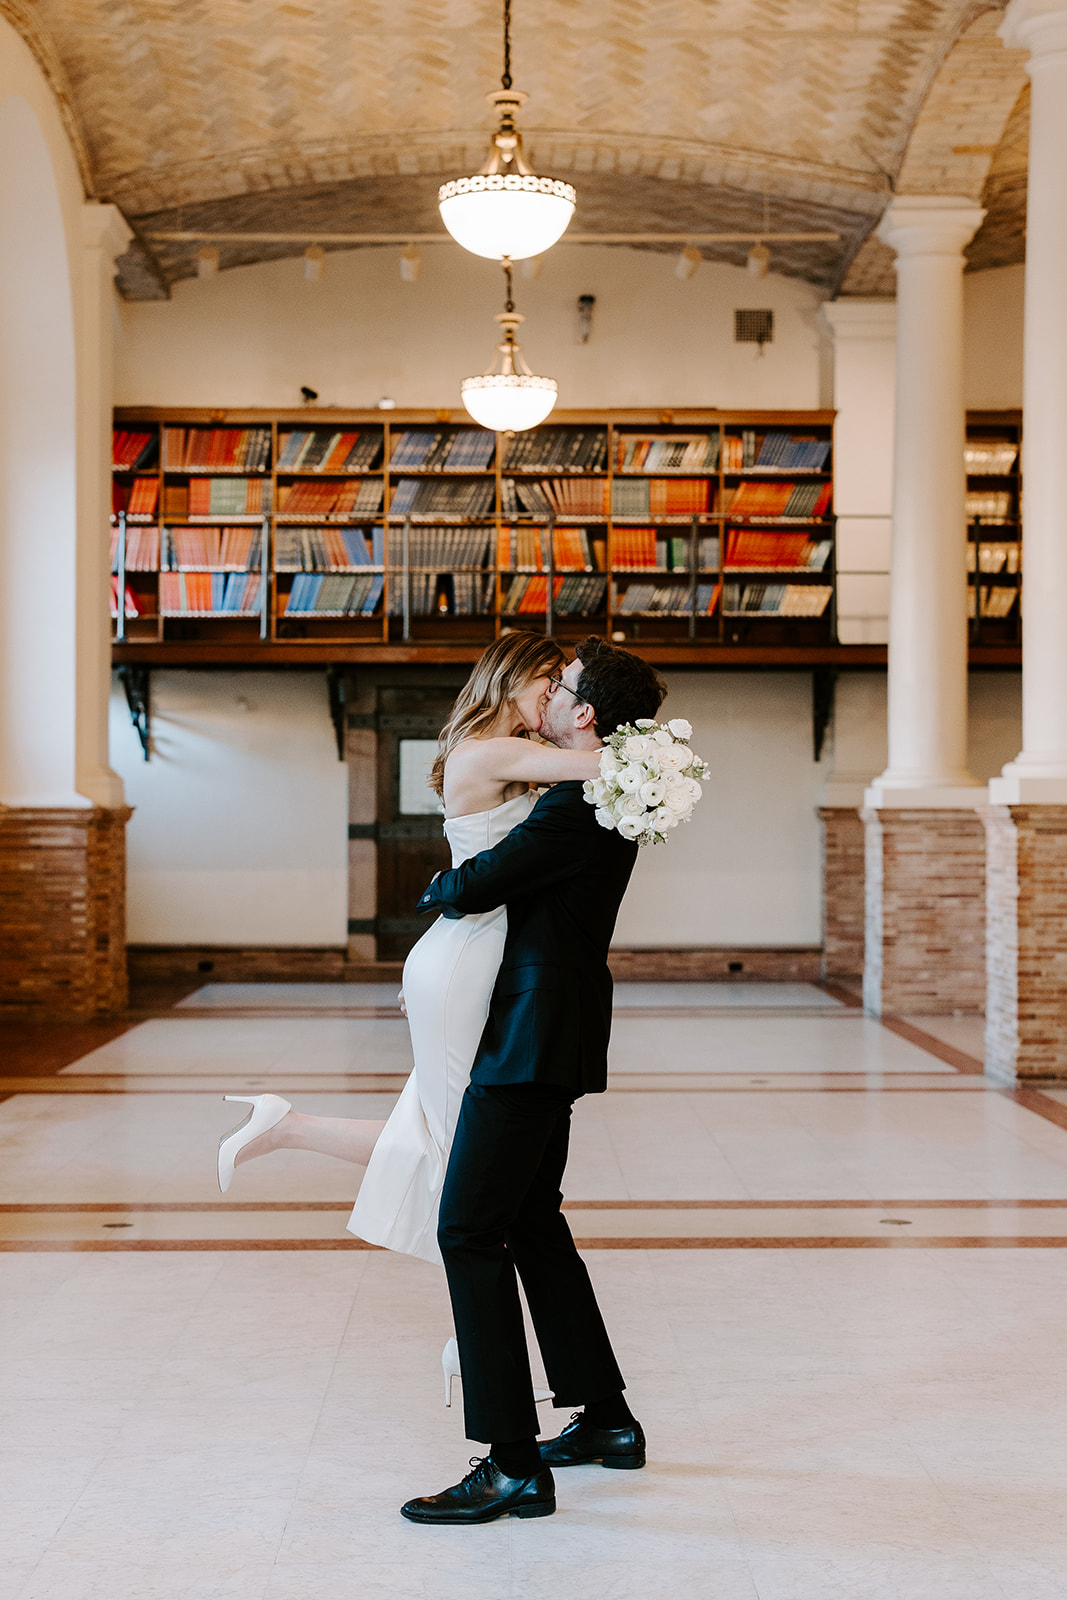 Stunning couple pose in the Boston public library after their dreamy winter elopement